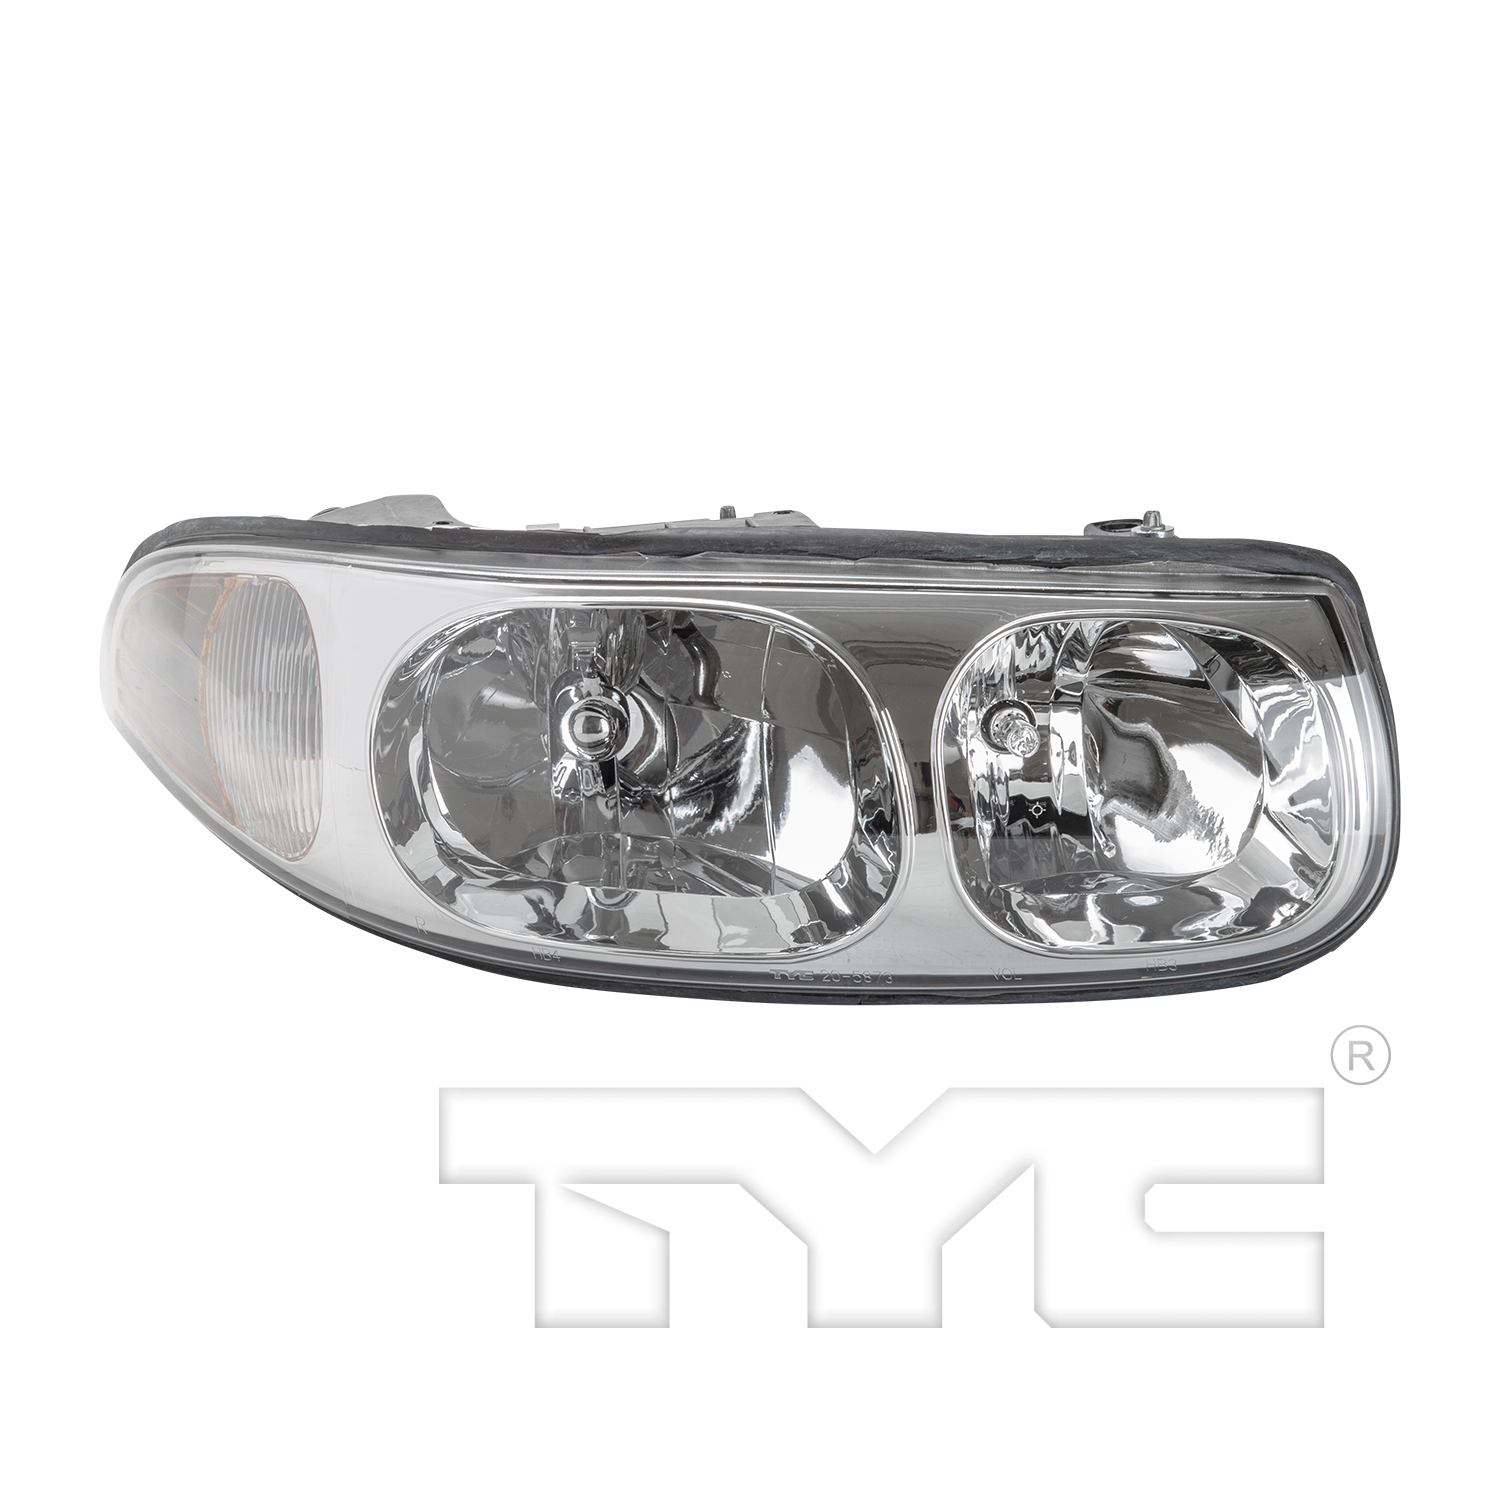 Aftermarket HEADLIGHTS for BUICK - LESABRE, LESABRE,00-05,RT Headlamp assy composite